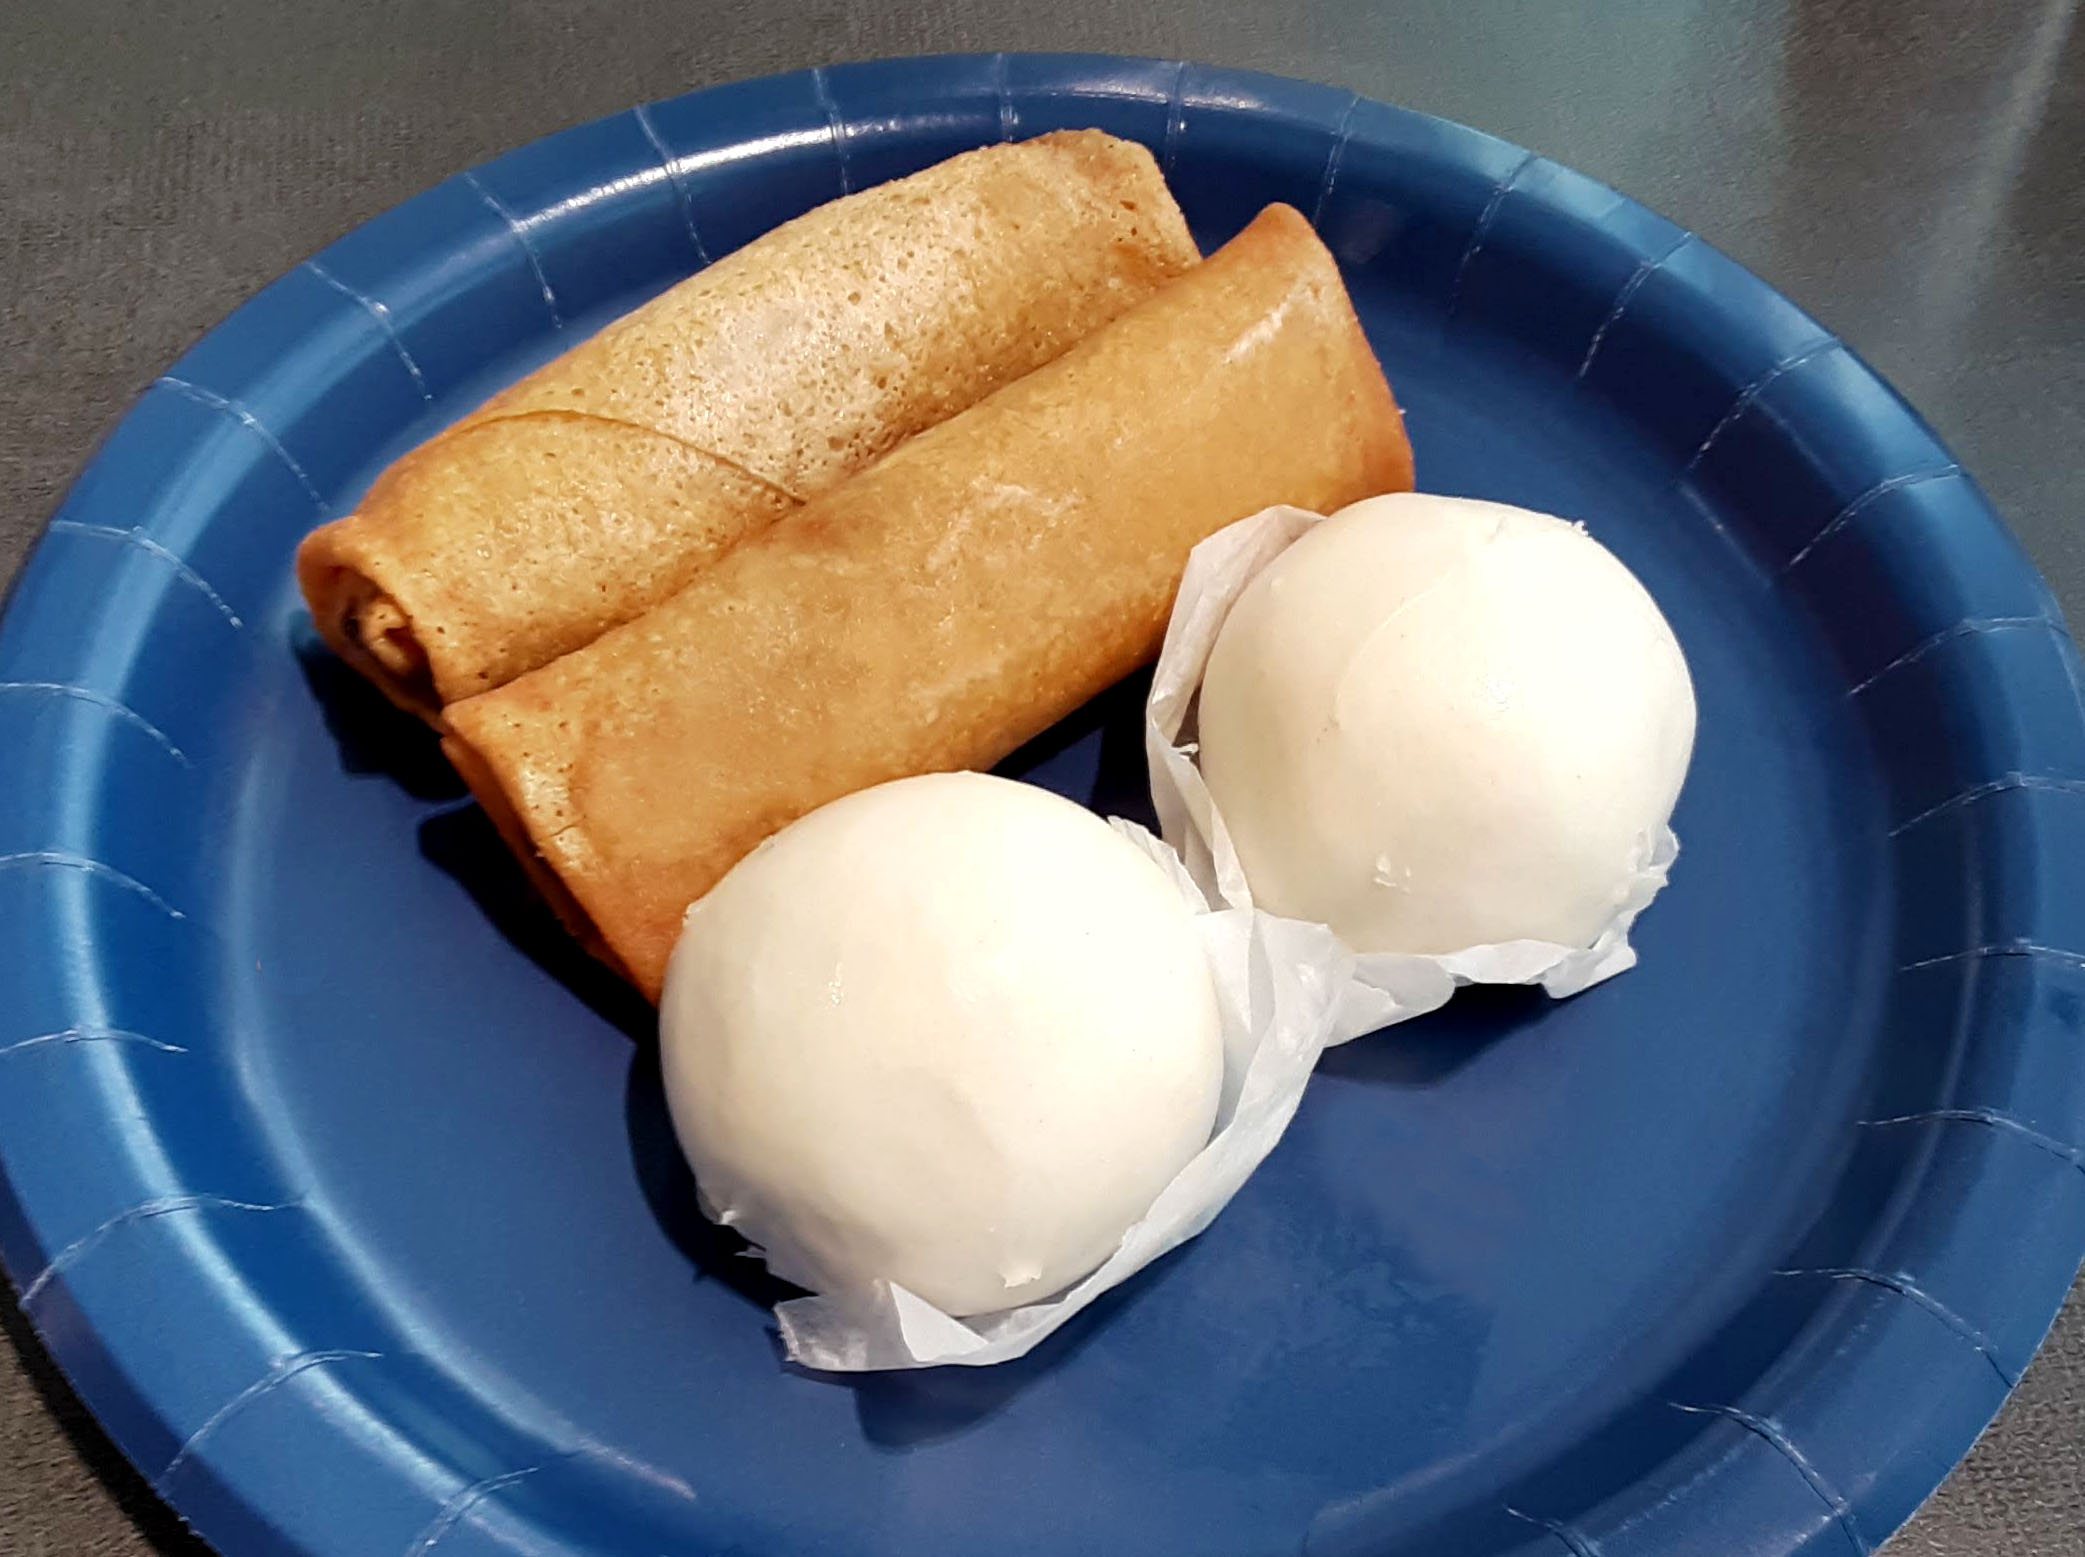 On a blue plate, there are two fried egg rolls and two steamed buns. Photo by Paul Young.